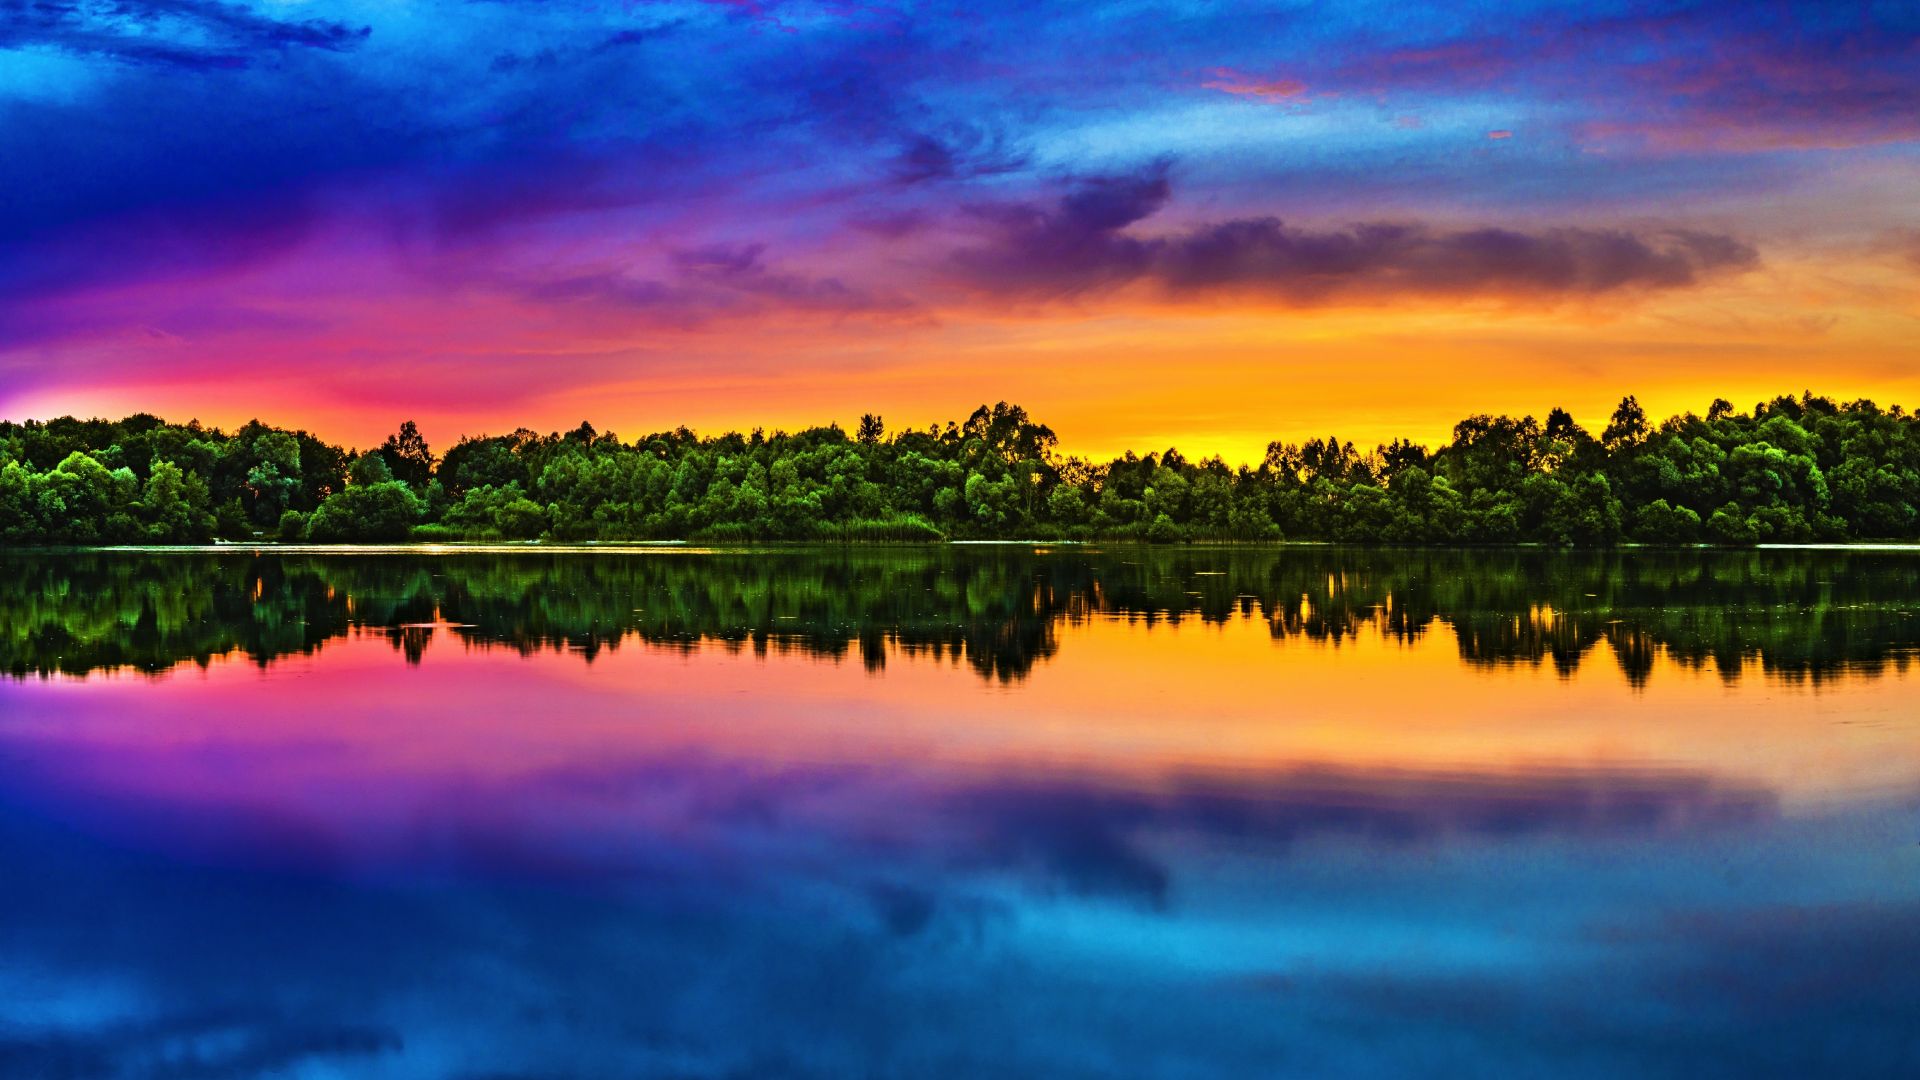 Wallpaper Colorful, skyline, sunset, lake, trees, reflections, nature, clouds